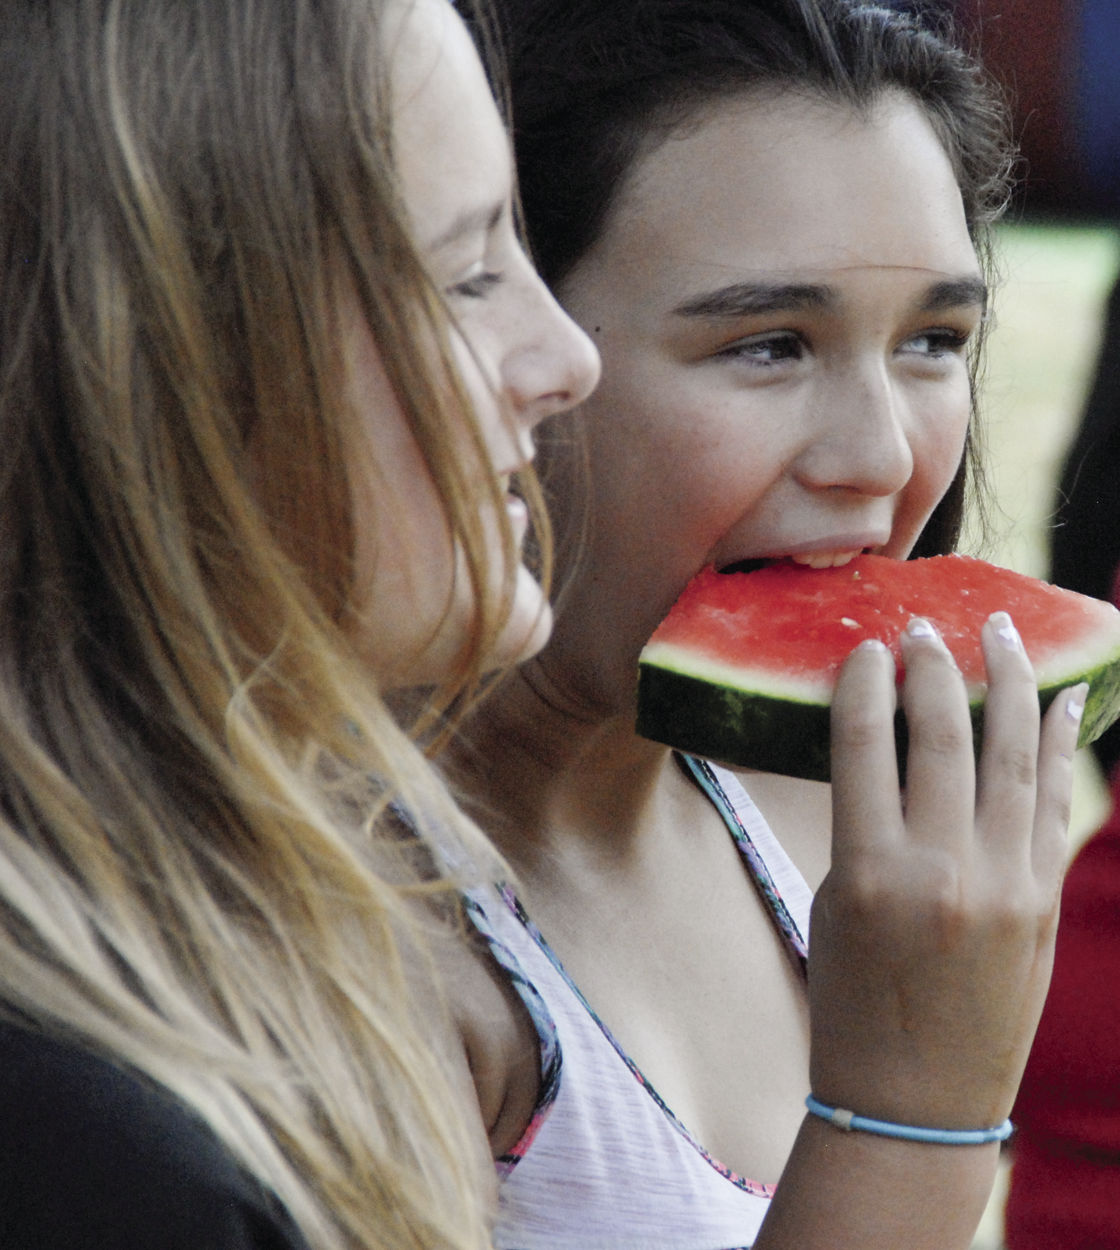 Watermelon Days brings smiles to many faces in Atkins News